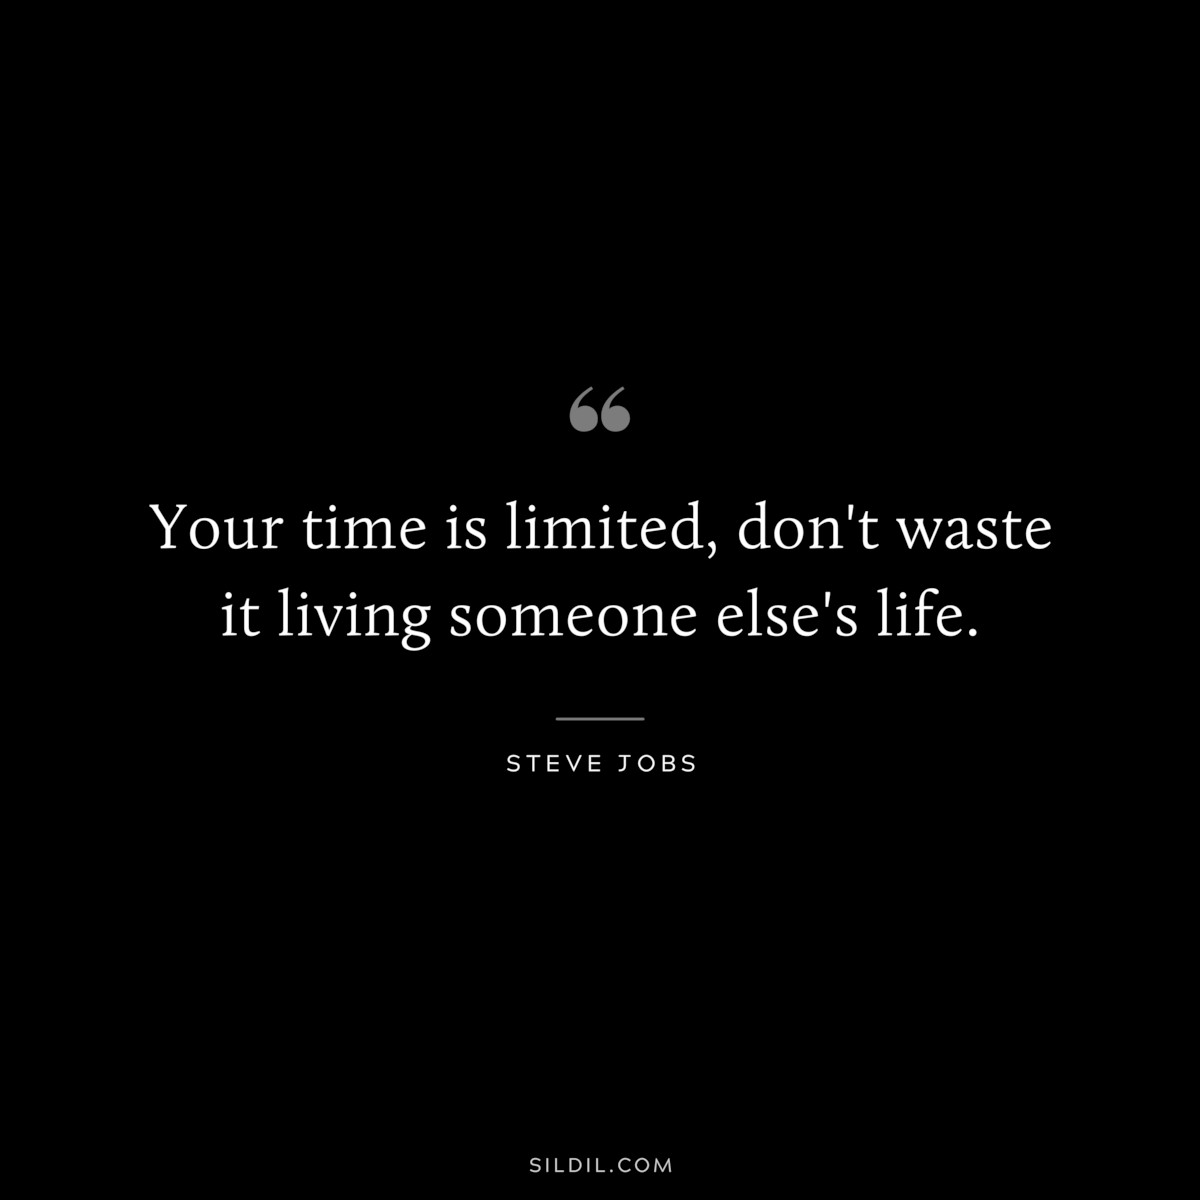 Your time is limited, don't waste it living someone else's life. ― Steve Jobs